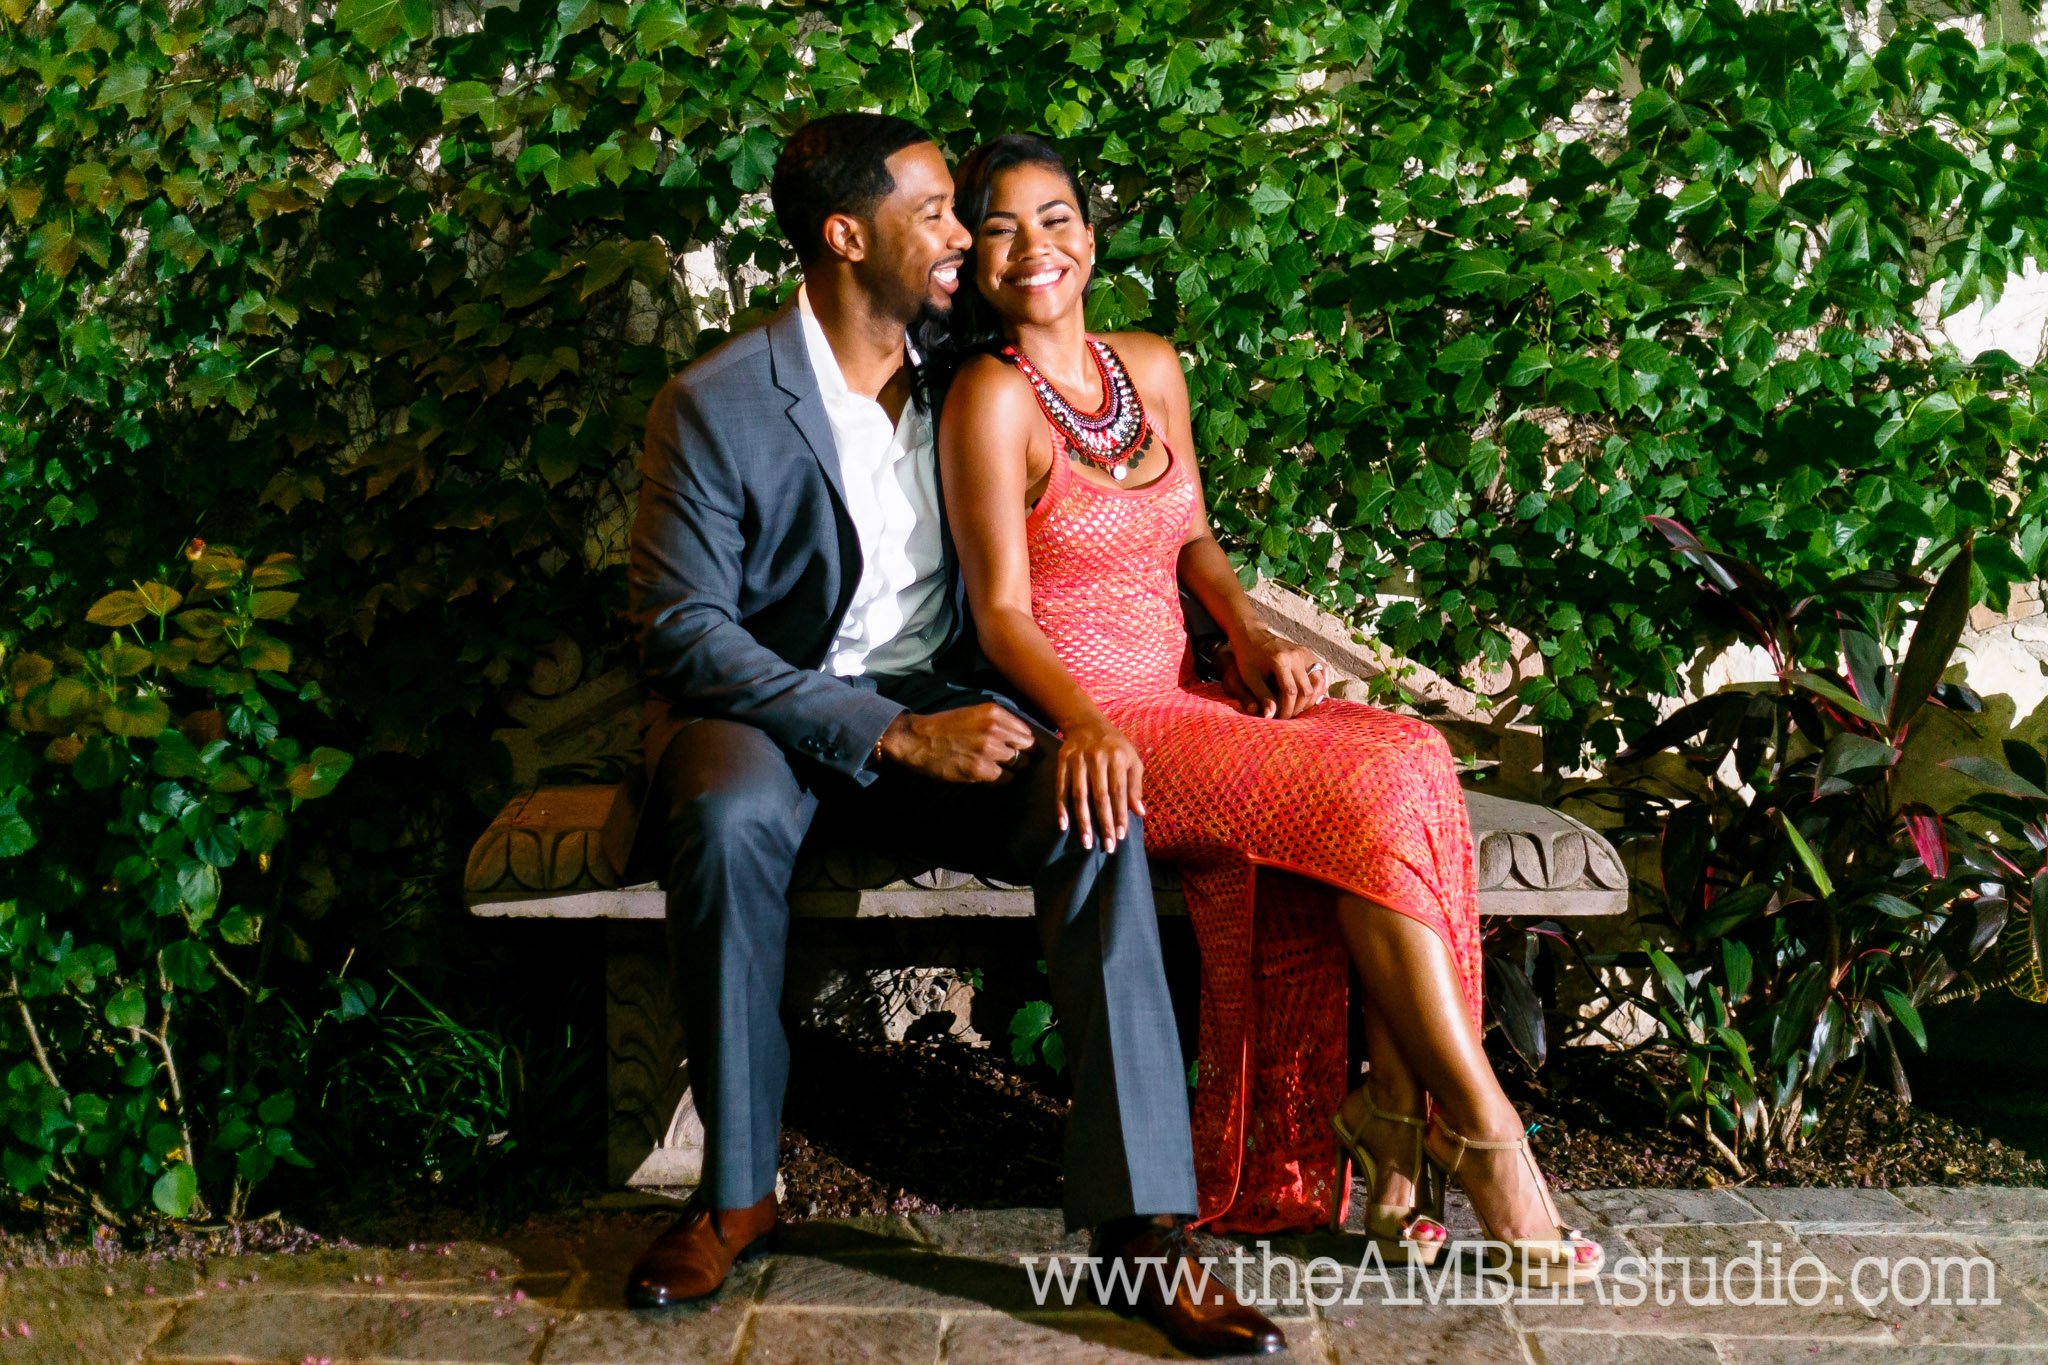 black-wedding-photographer-dallas-texas-engagement-photos-amber-knowles-studio-fort-worth-botanical-gardens-red-dress-suit-african-american-couple-cc0016